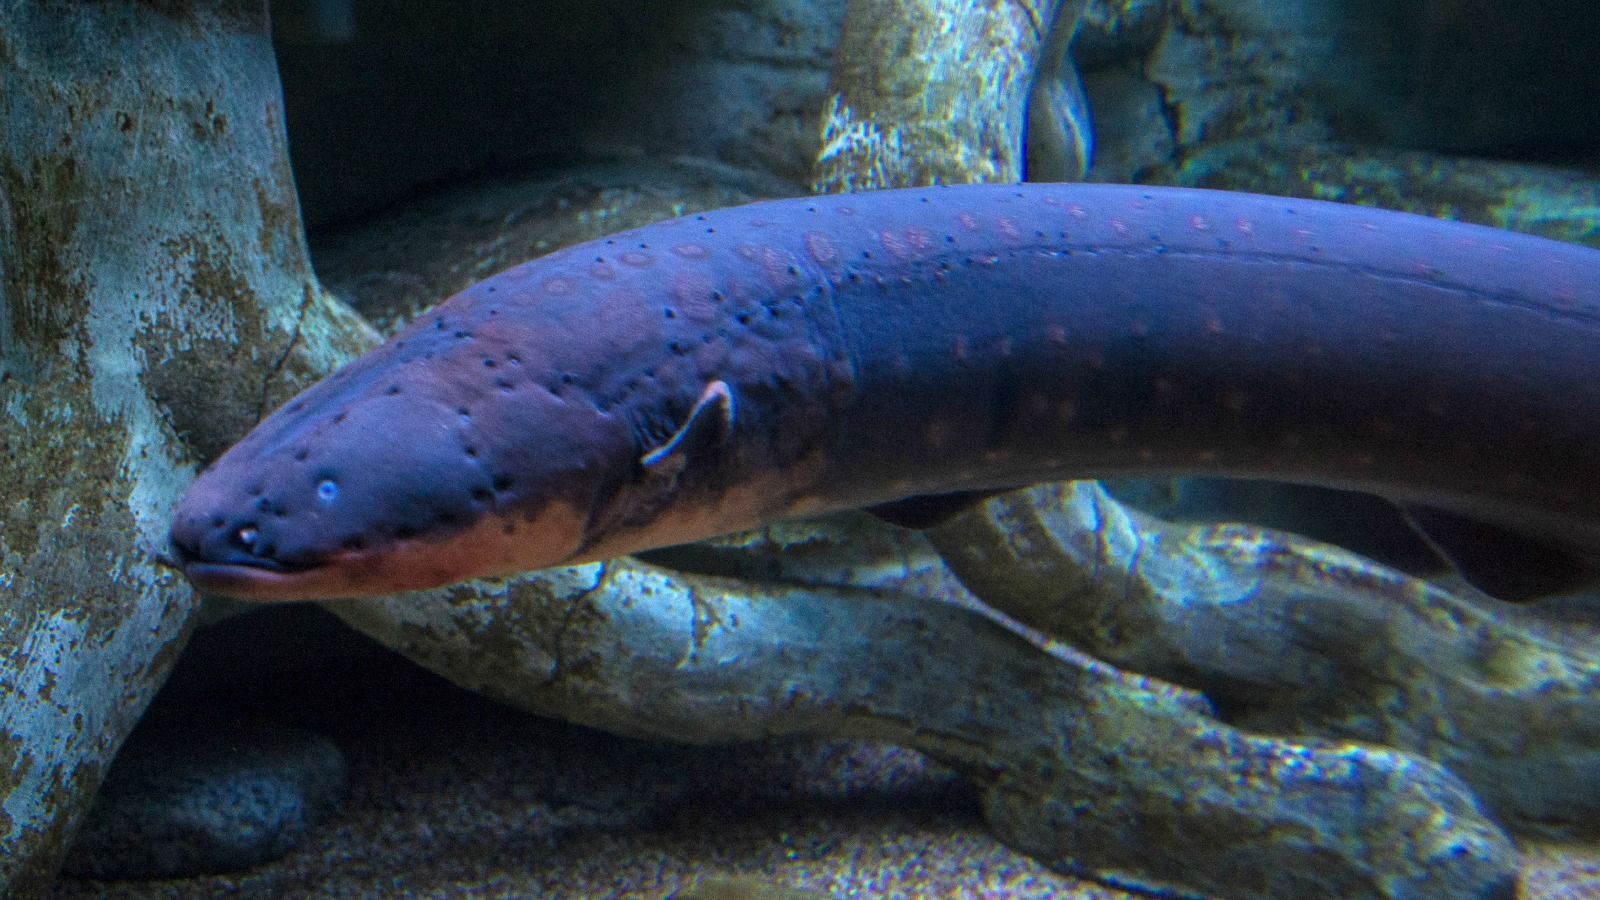 Unlike most fish, electric eels cannot get enough oxygen